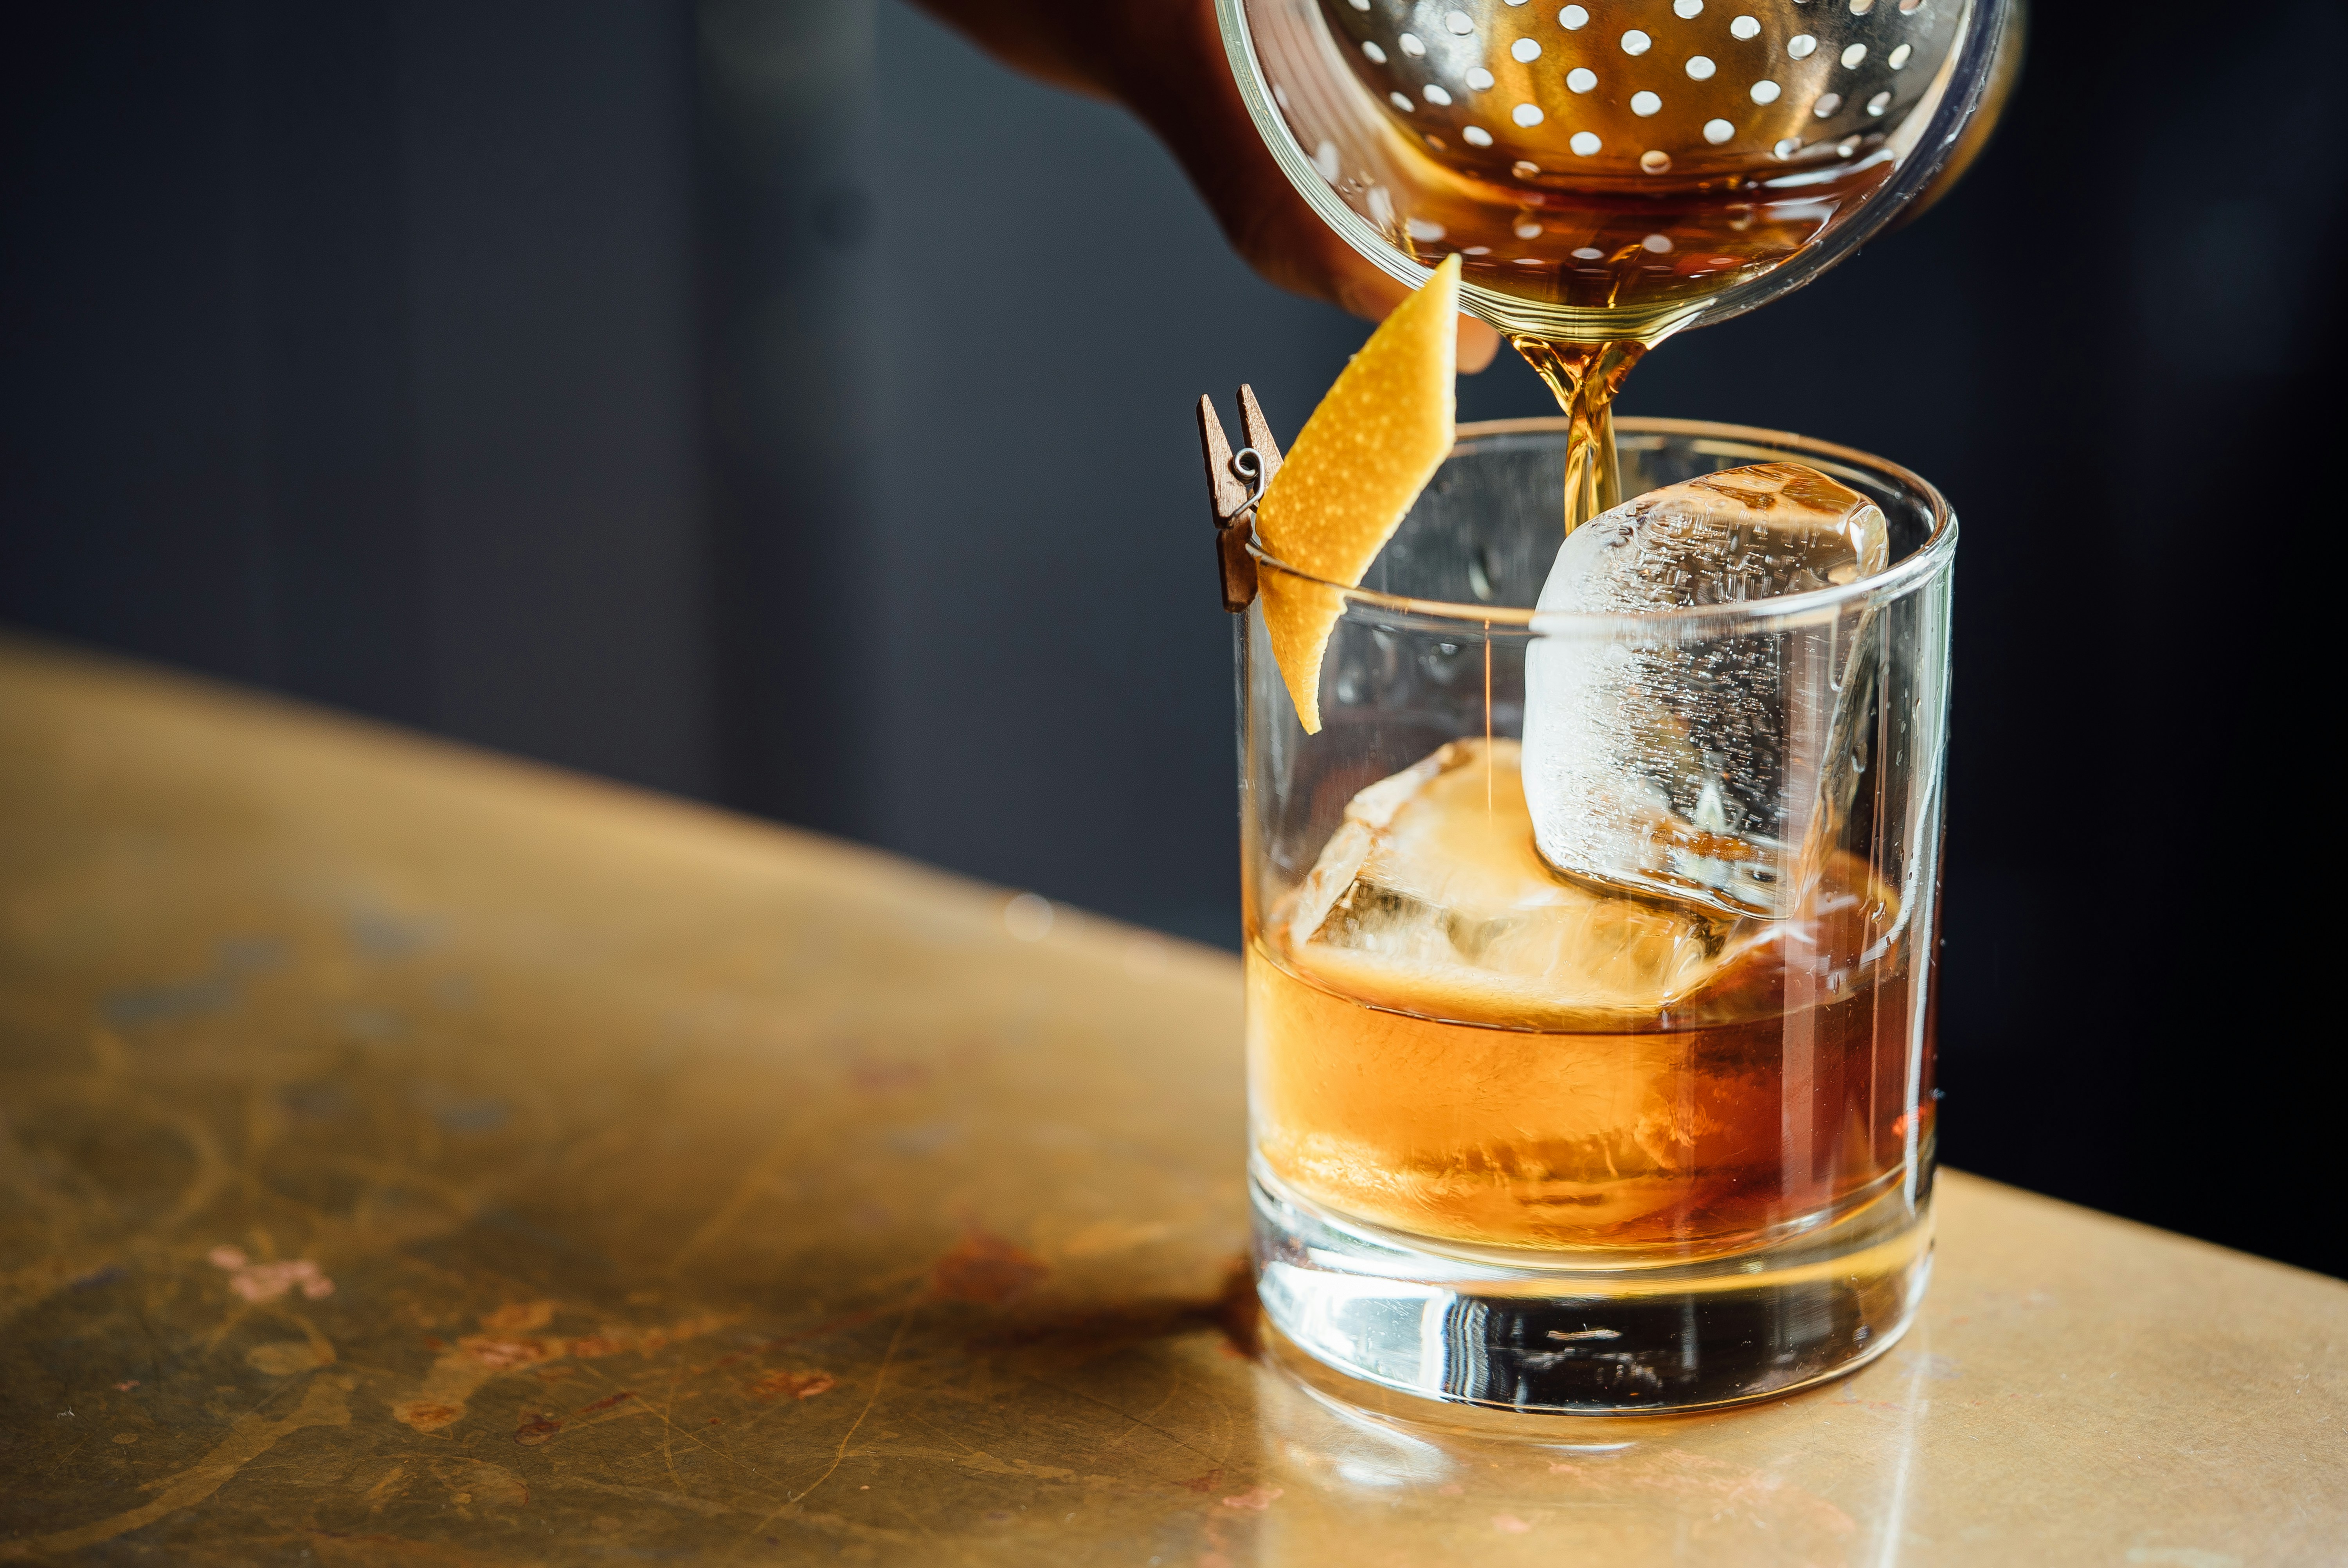 Should Whiskey Be Sipped Or Drank Quickly?